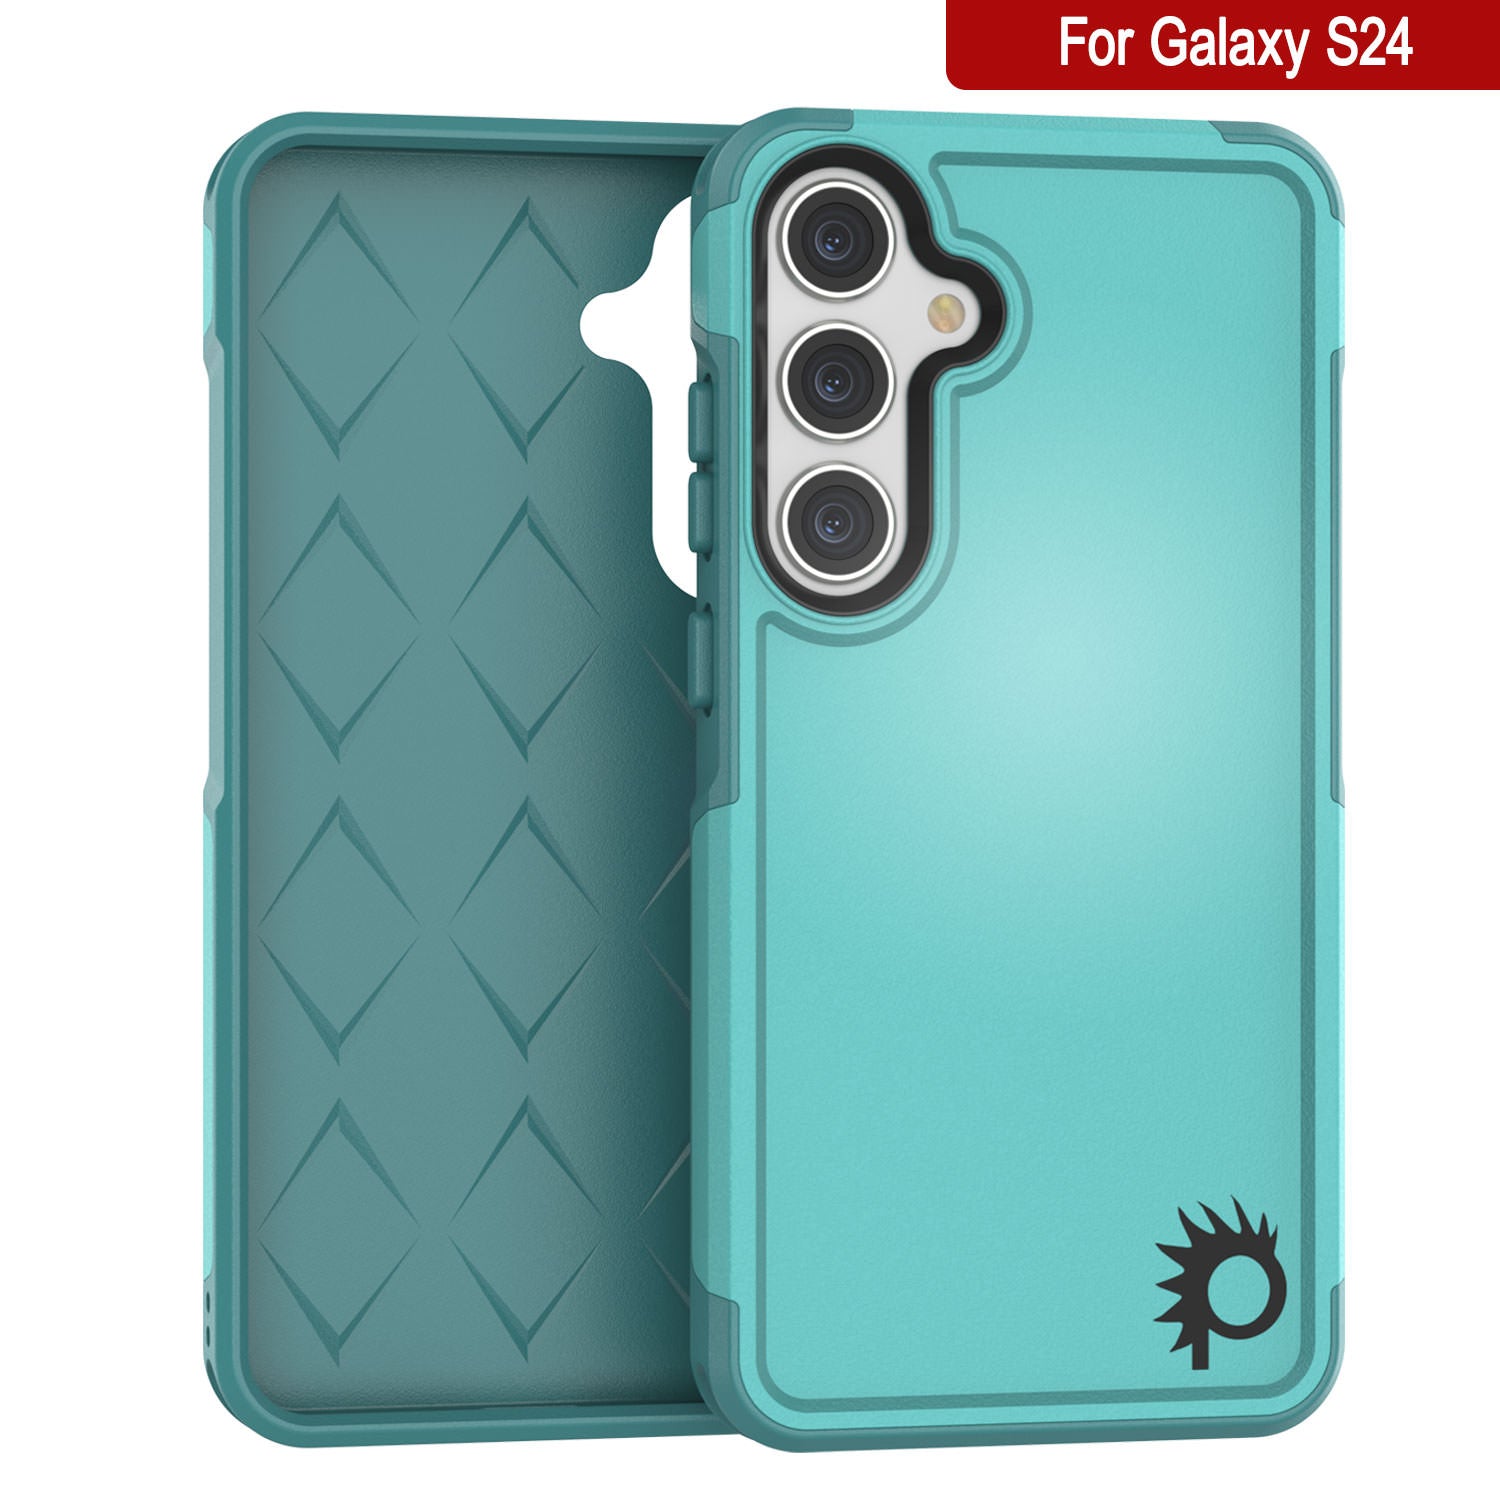 PunkCase Galaxy S24 Case, [Spartan 2.0 Series] Clear Rugged Heavy Duty Cover [Light Blue]